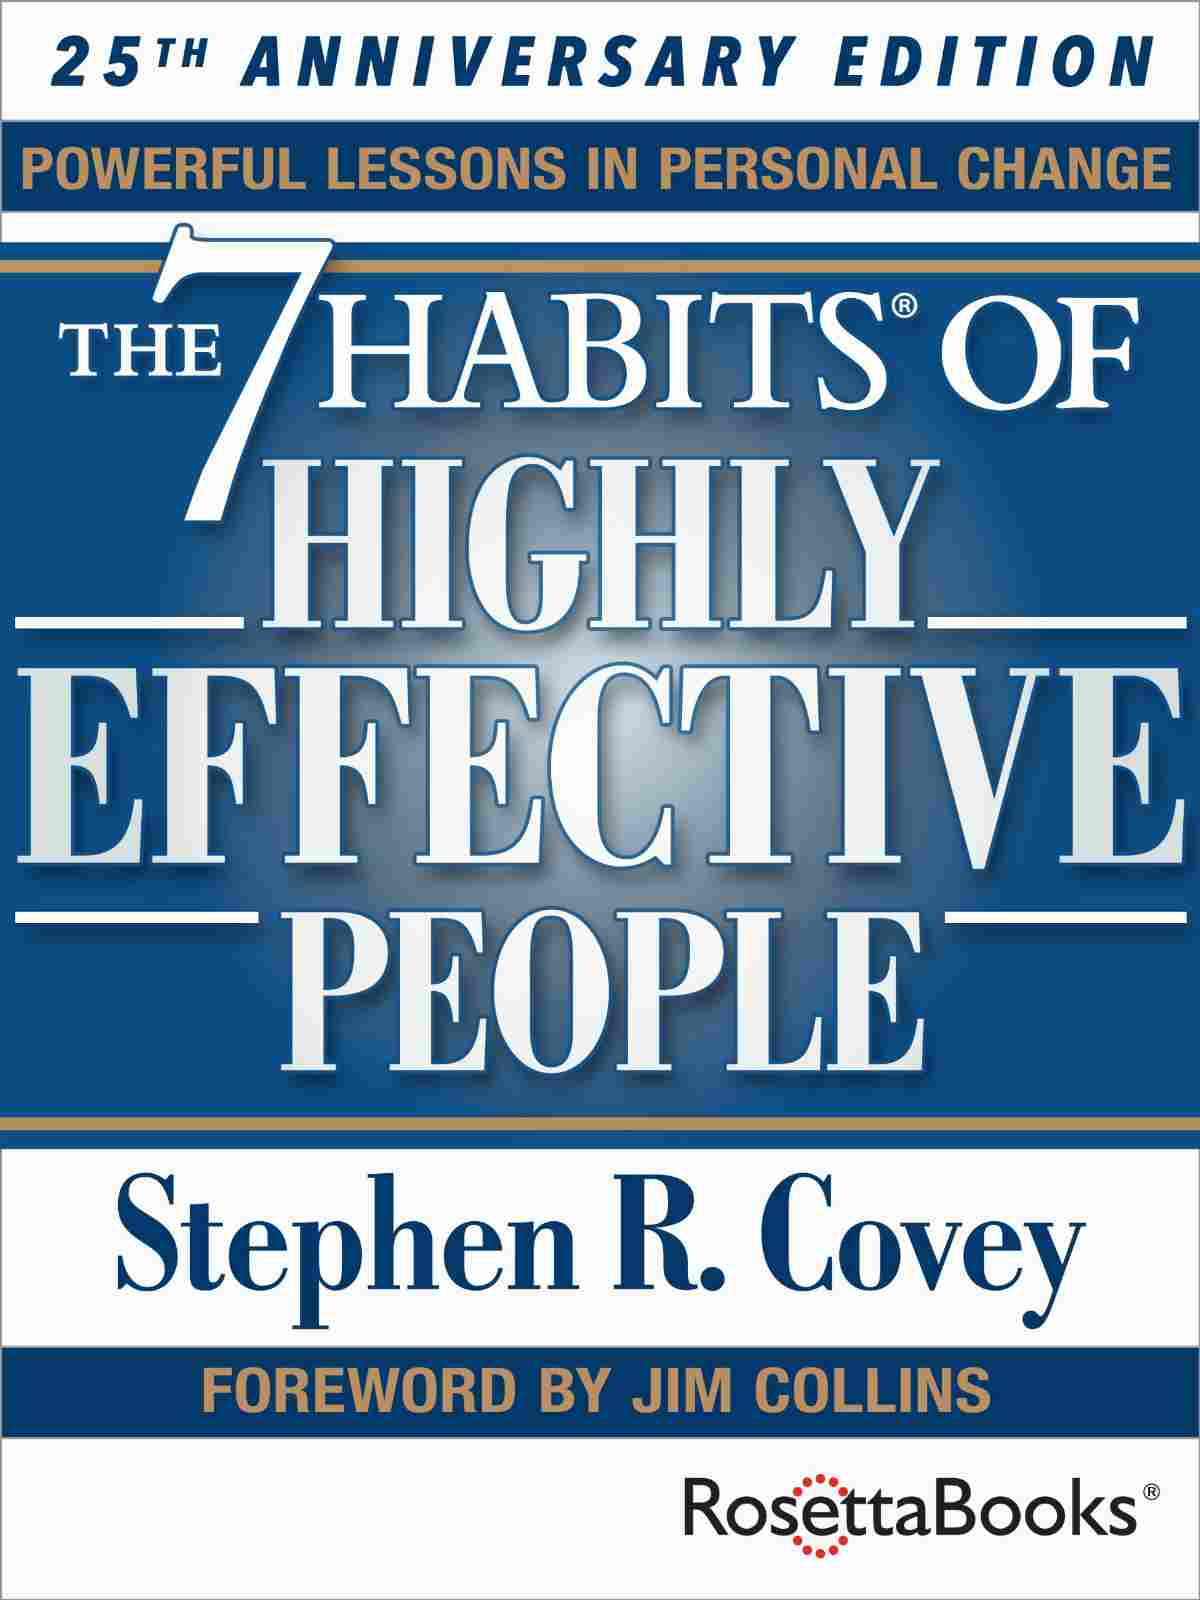 The 7 Habits of Highly Effective People: Powerful Lessons in Personal Change | Bestselling Amazon Kindle Books Of 2018